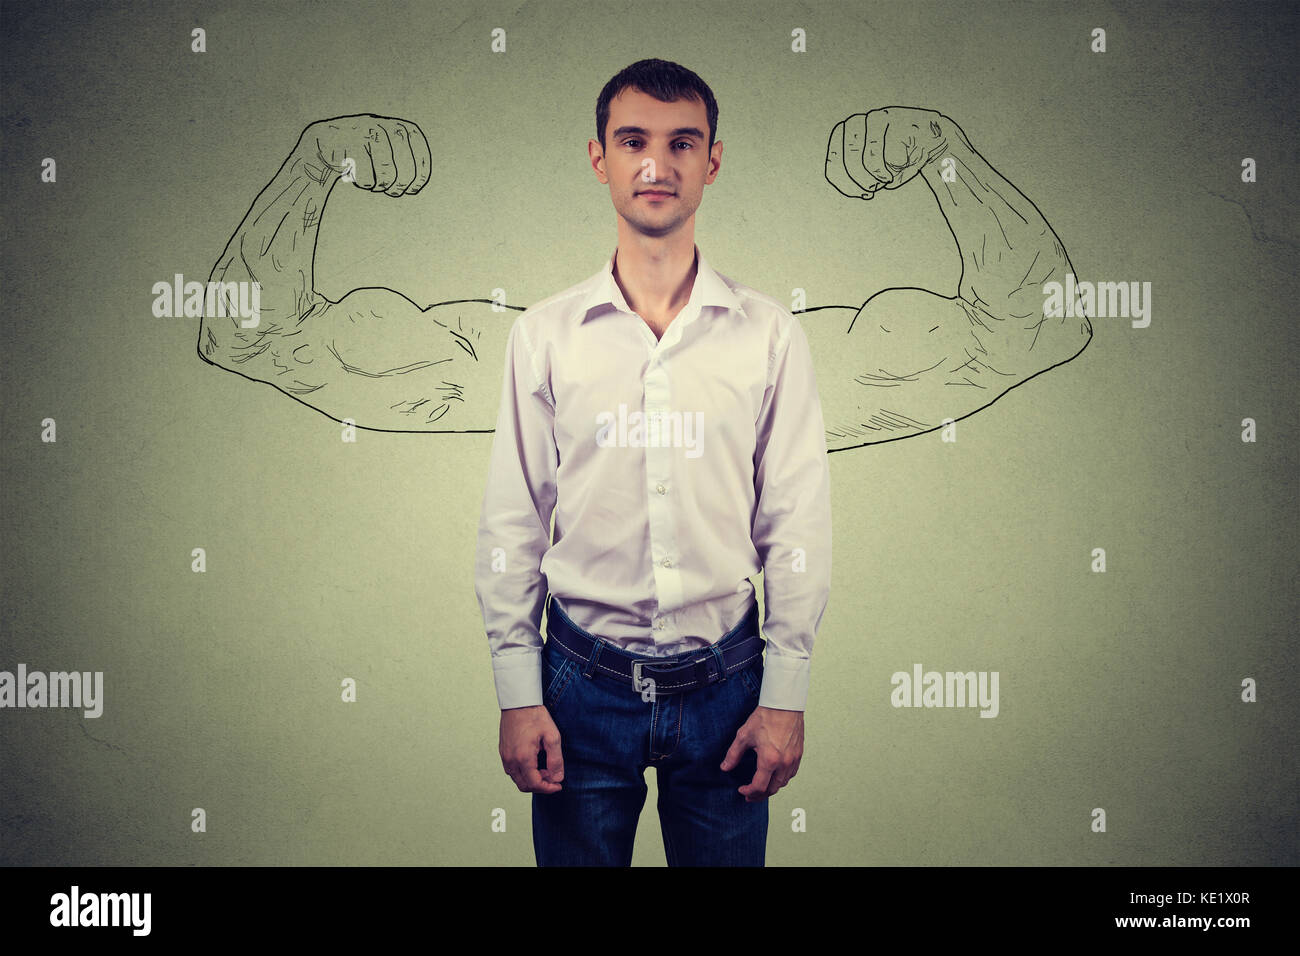 Powerful man reality vs ambition wishful thinking concept. Human face expressions, emotions Stock Photo